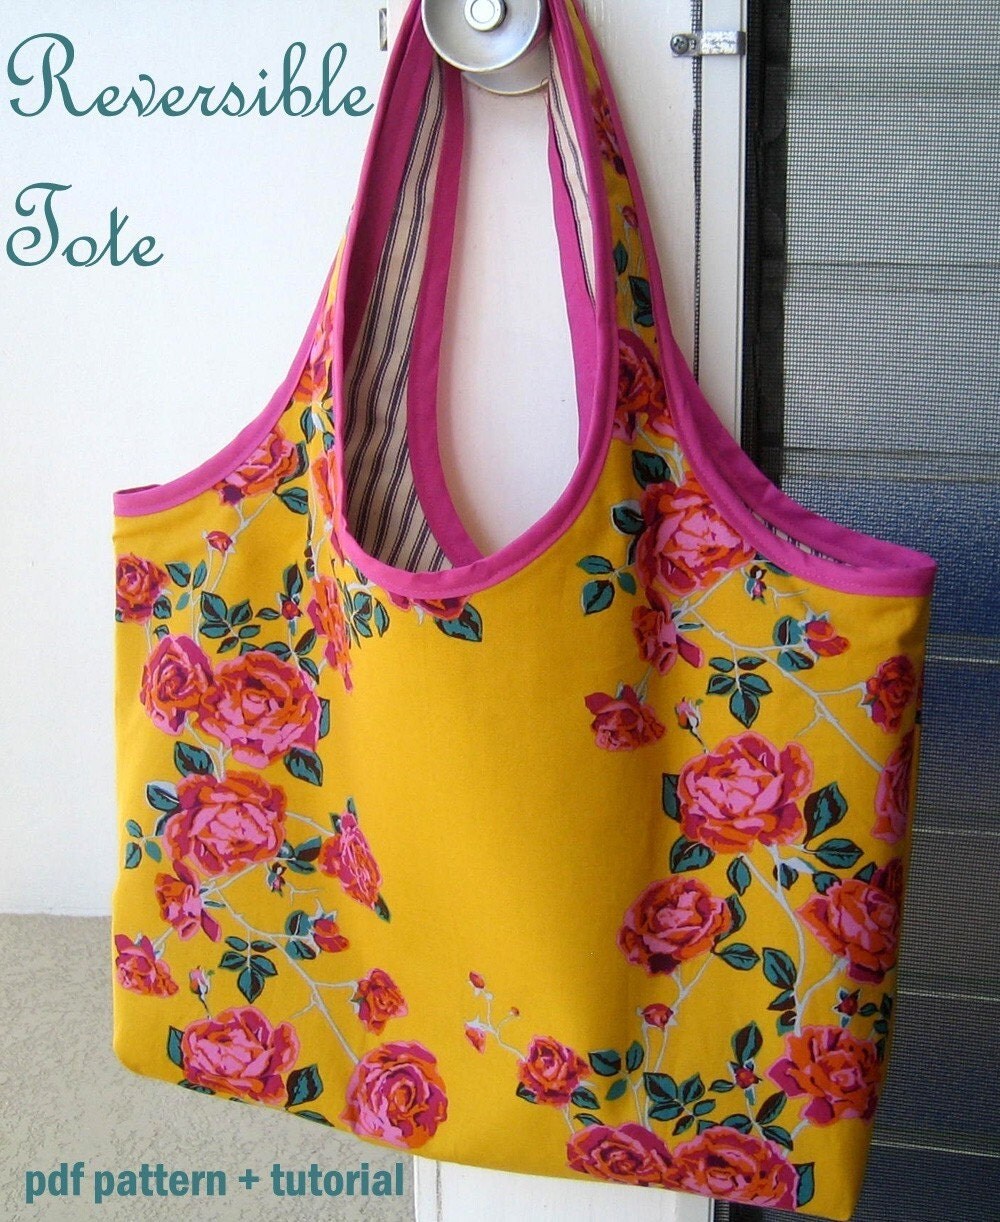 Reversible Tote Bag PDF Sewing Pattern and Tutorial by alifoster